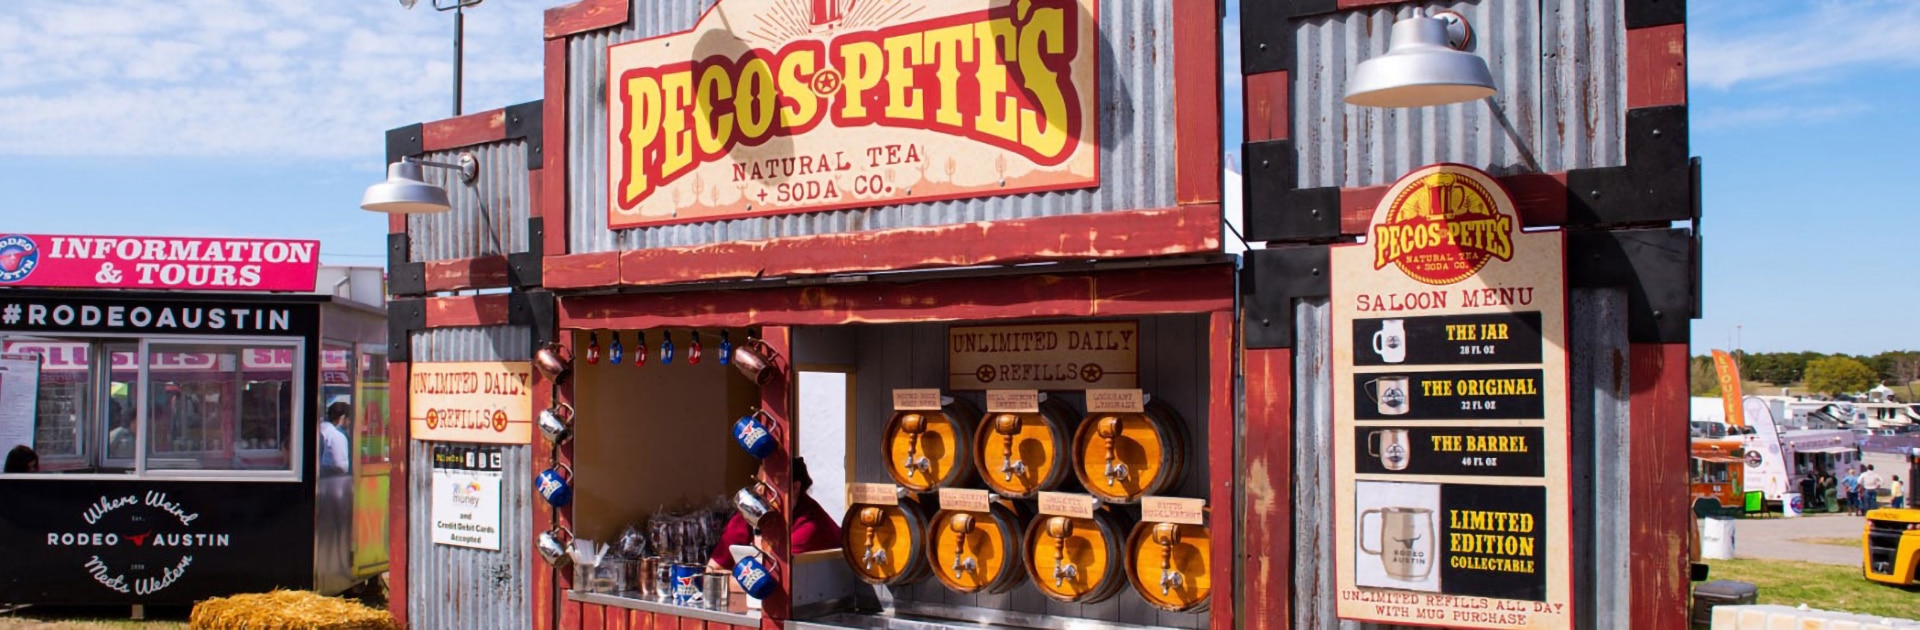 Pecos Petes Soda booth on Chowtown